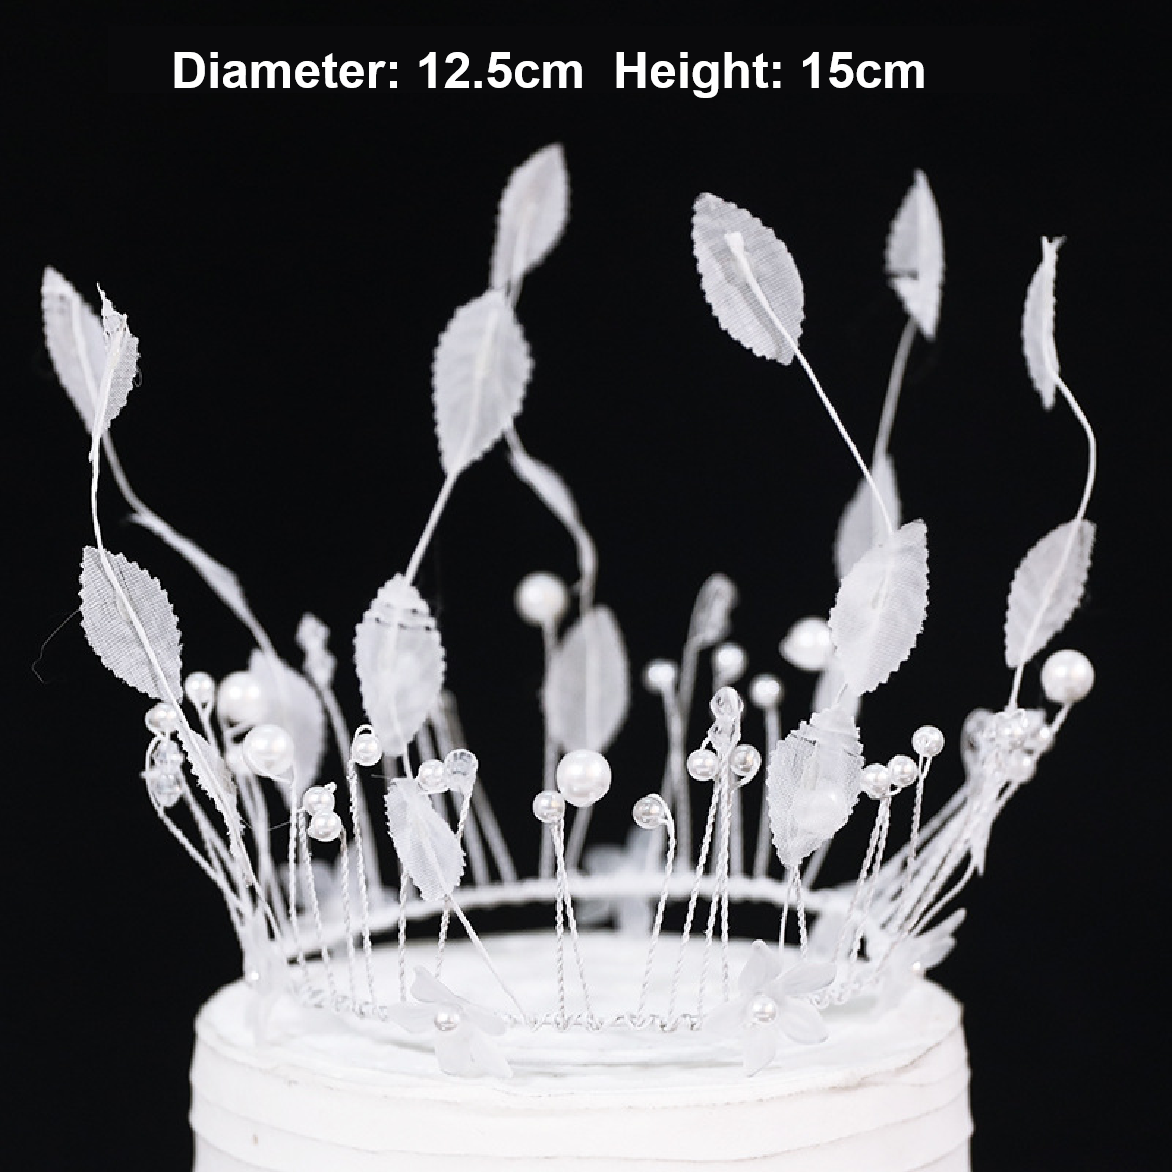 Cake Topper, Cake Decorations- Tiara 'Vintage Leaf Crown' with pearls - Rampant Coffee Company